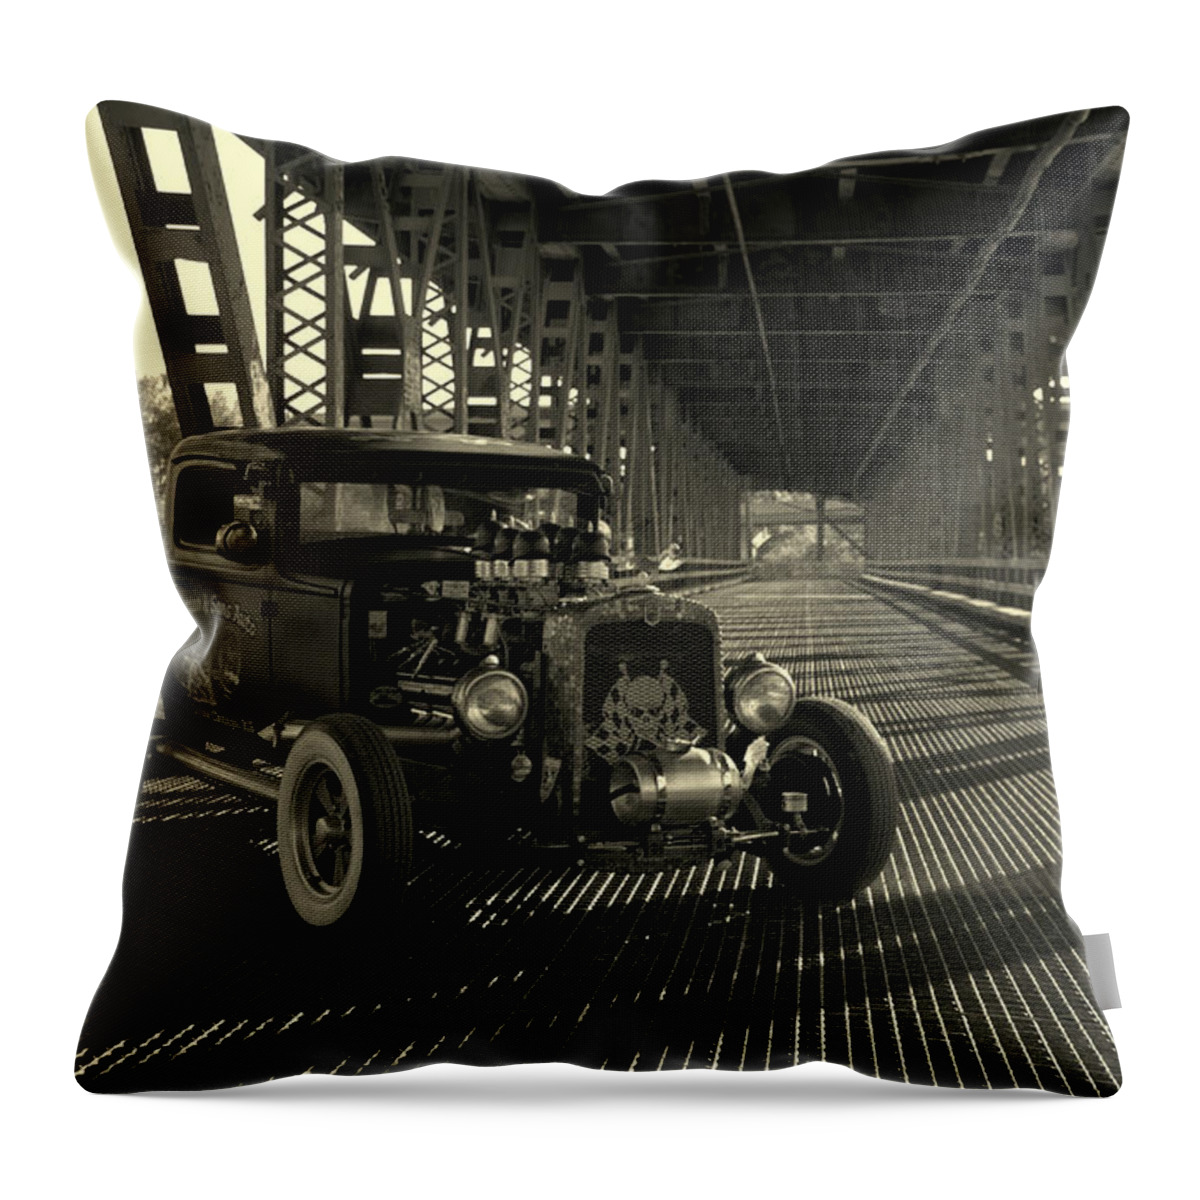 1931 Throw Pillow featuring the photograph 1931 Nash Coupe Rat Rod by Tim McCullough